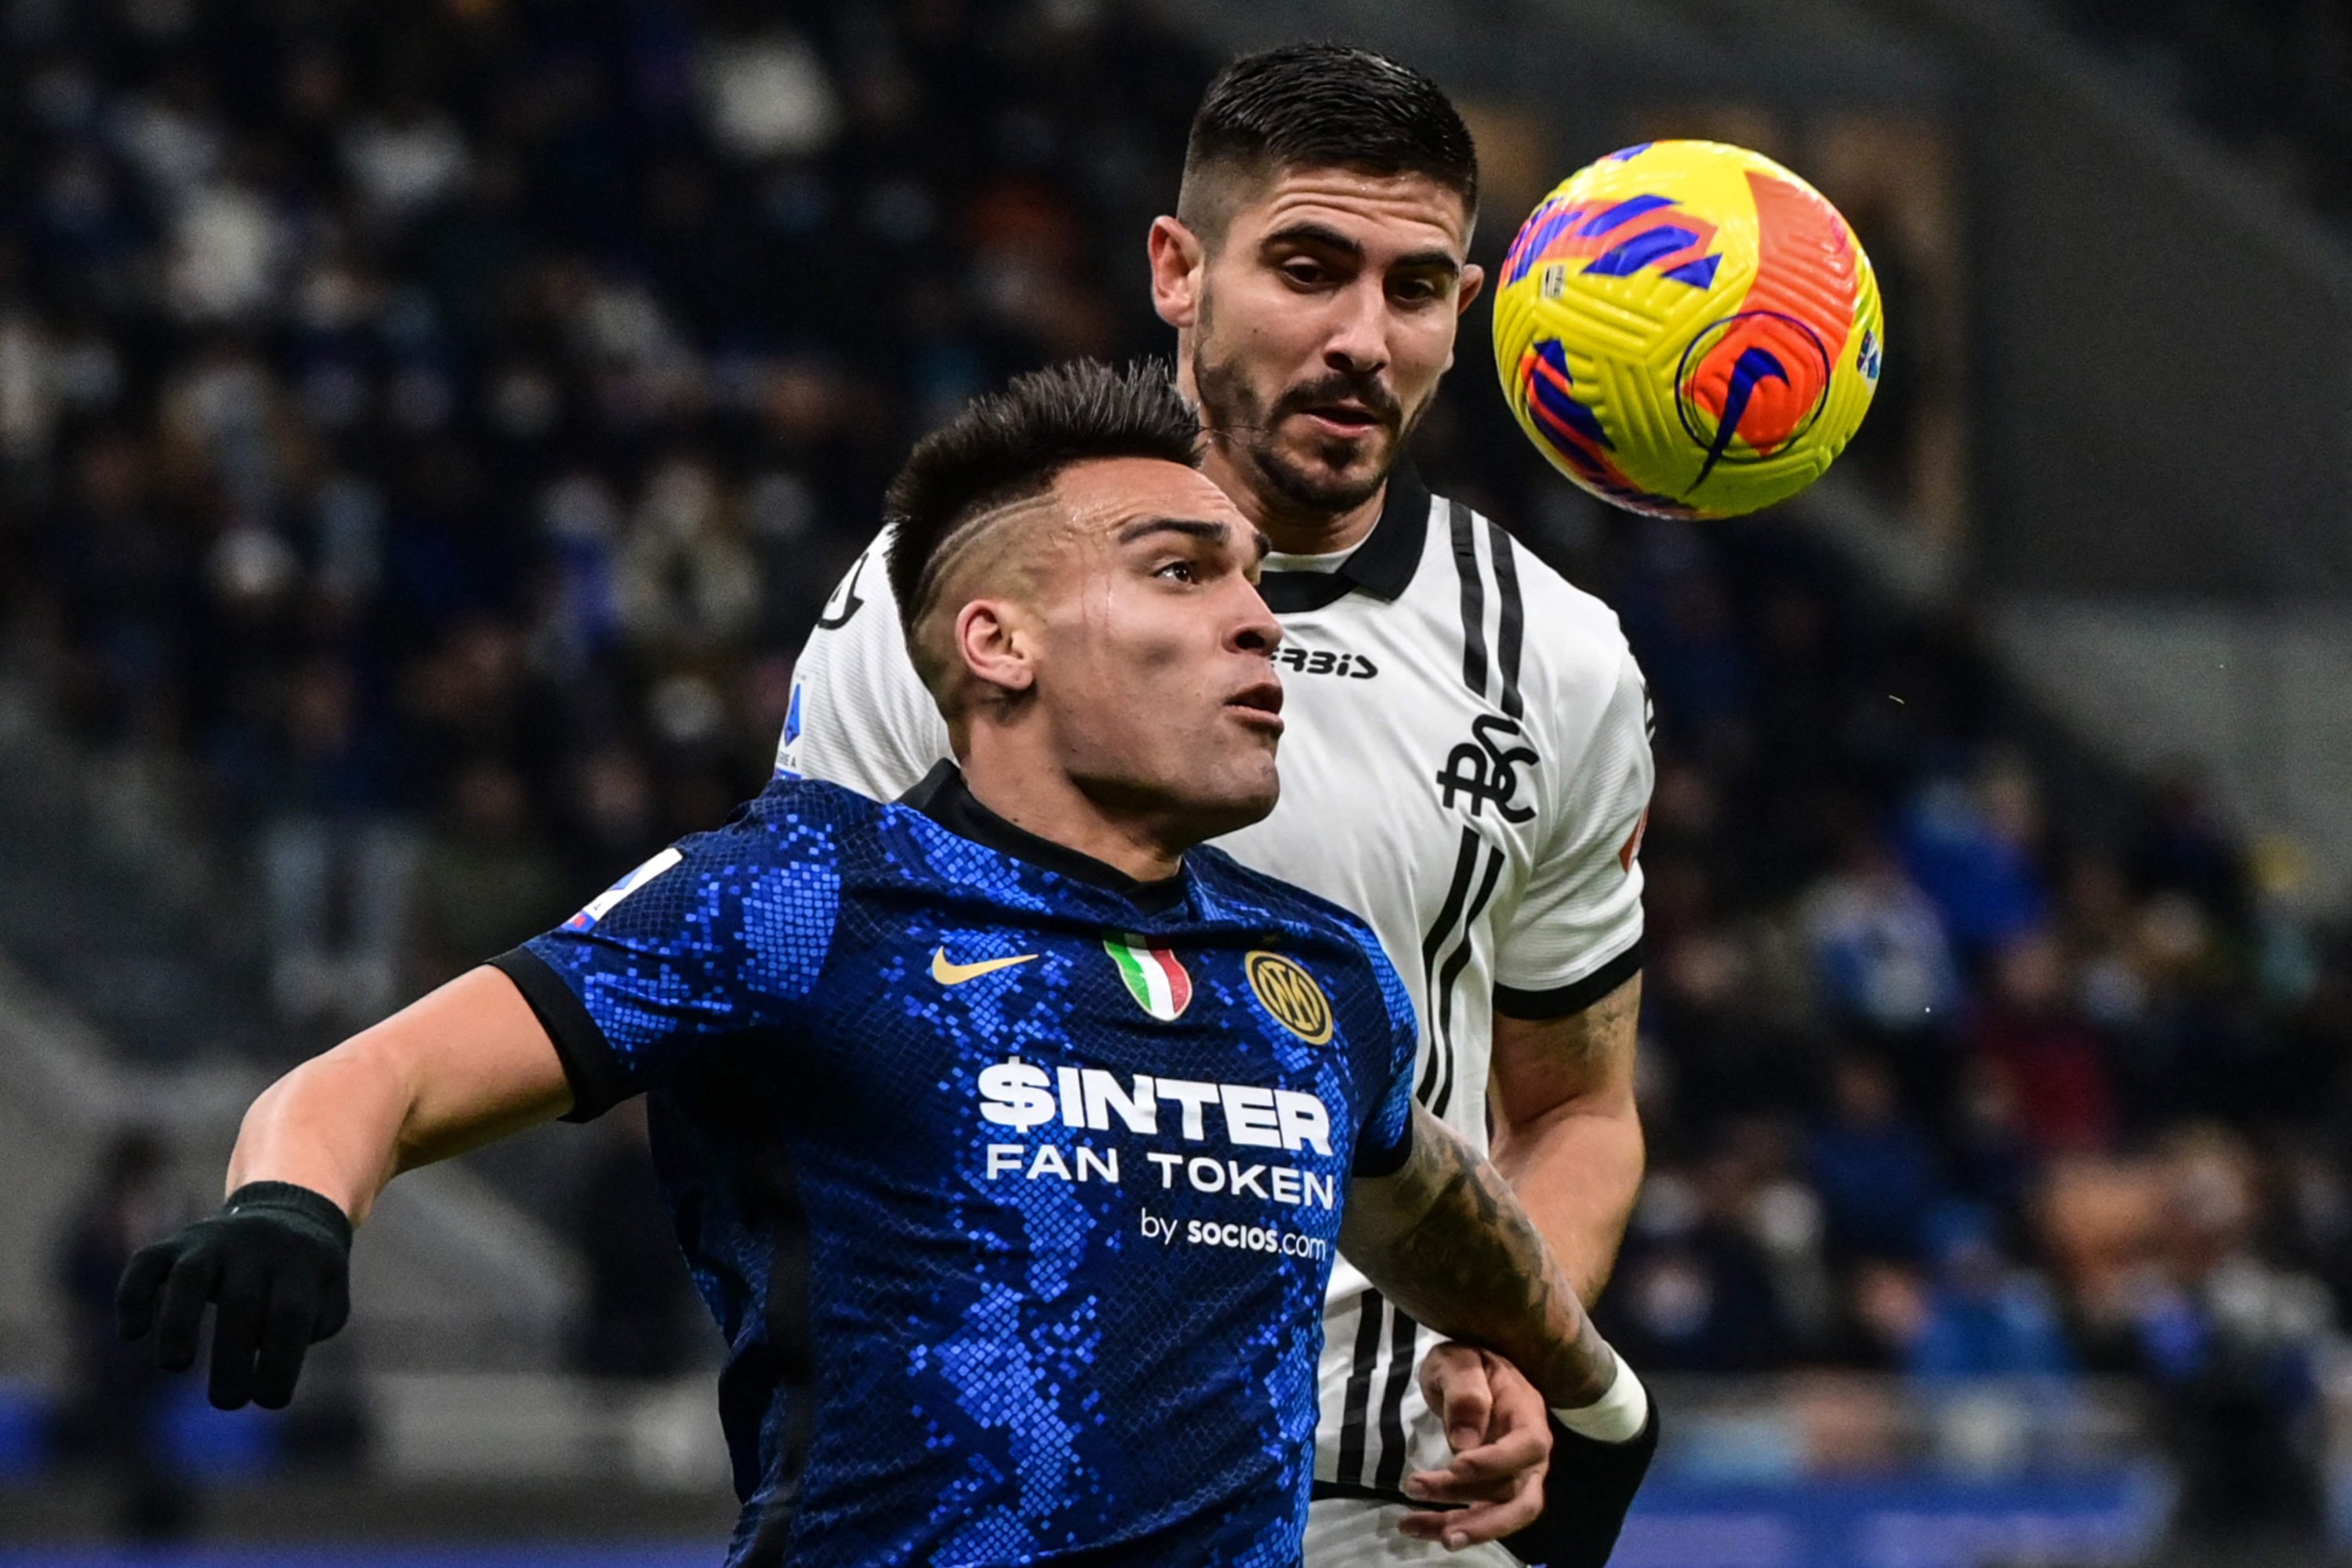 Inter Milan's Argentine forward Lautaro Martinez (C) and Spezia's Croatian defender Martin Erlic vie for the ball in a Serie A match, Milan, Italy, Dec. 1, 2021. (AFP Photo)